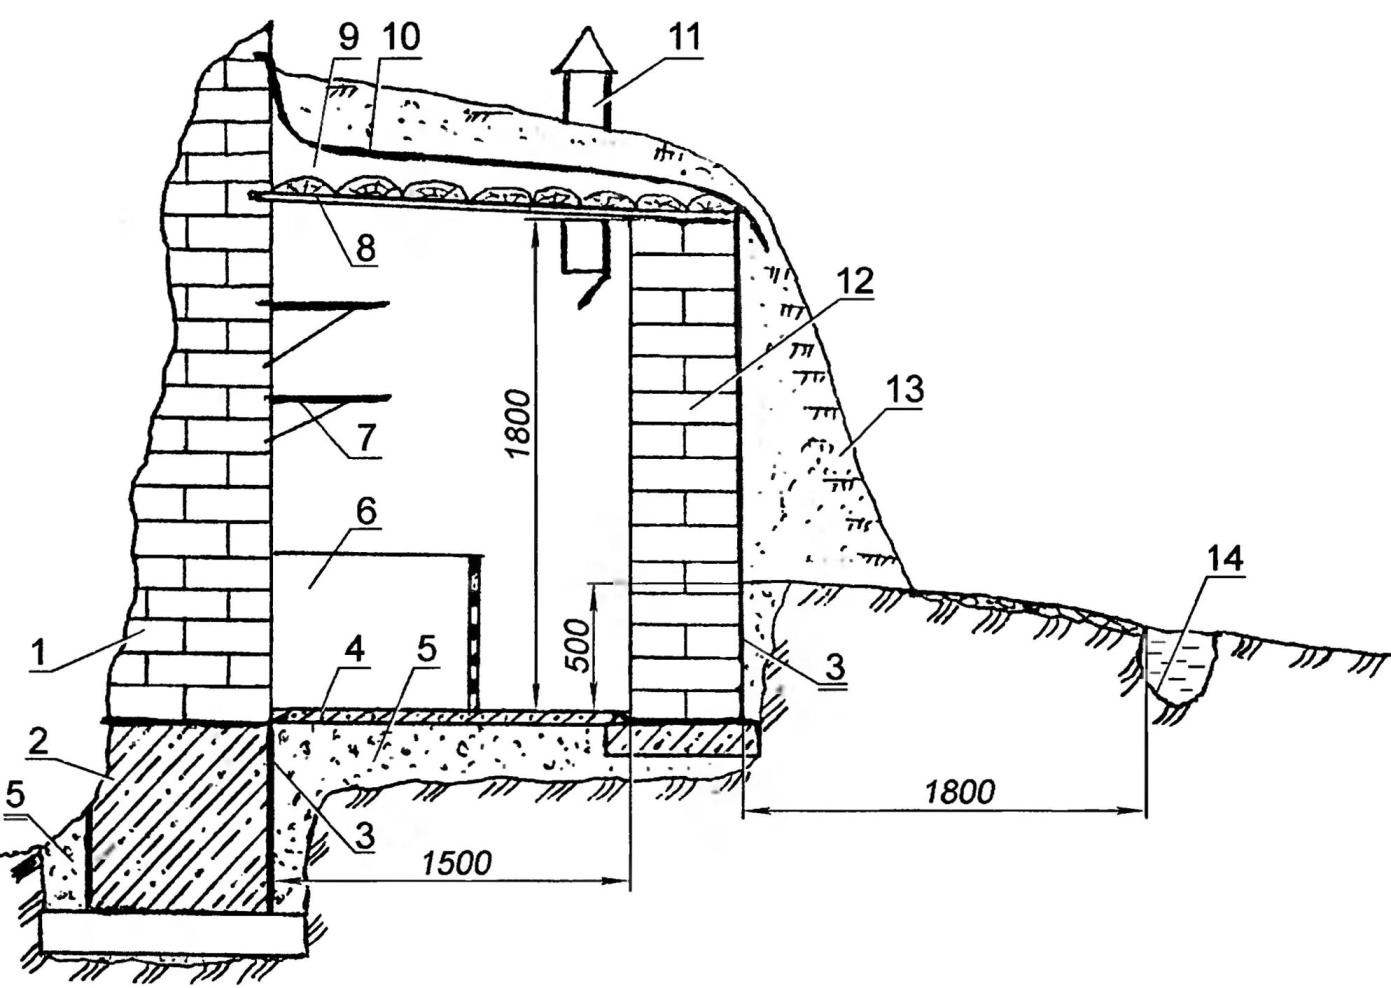 Fig. 1. Cellar wall with advanced security